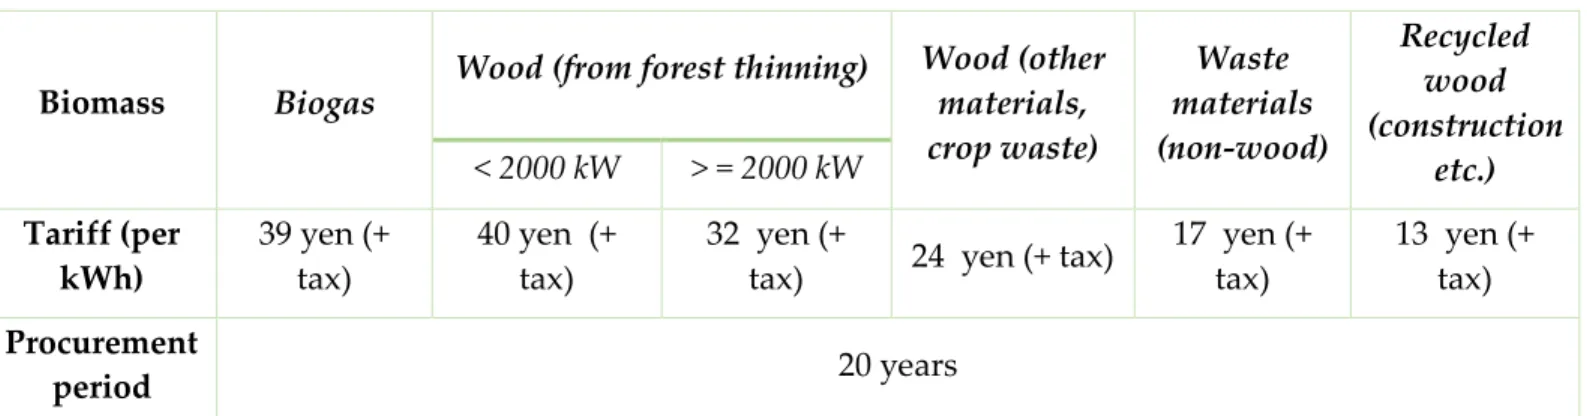 Table 1: FITs for biomass in Japan, as set in 2012 with an alteration of the FITs for power generated with wood from  forest thinnings (Asako, 2015) 